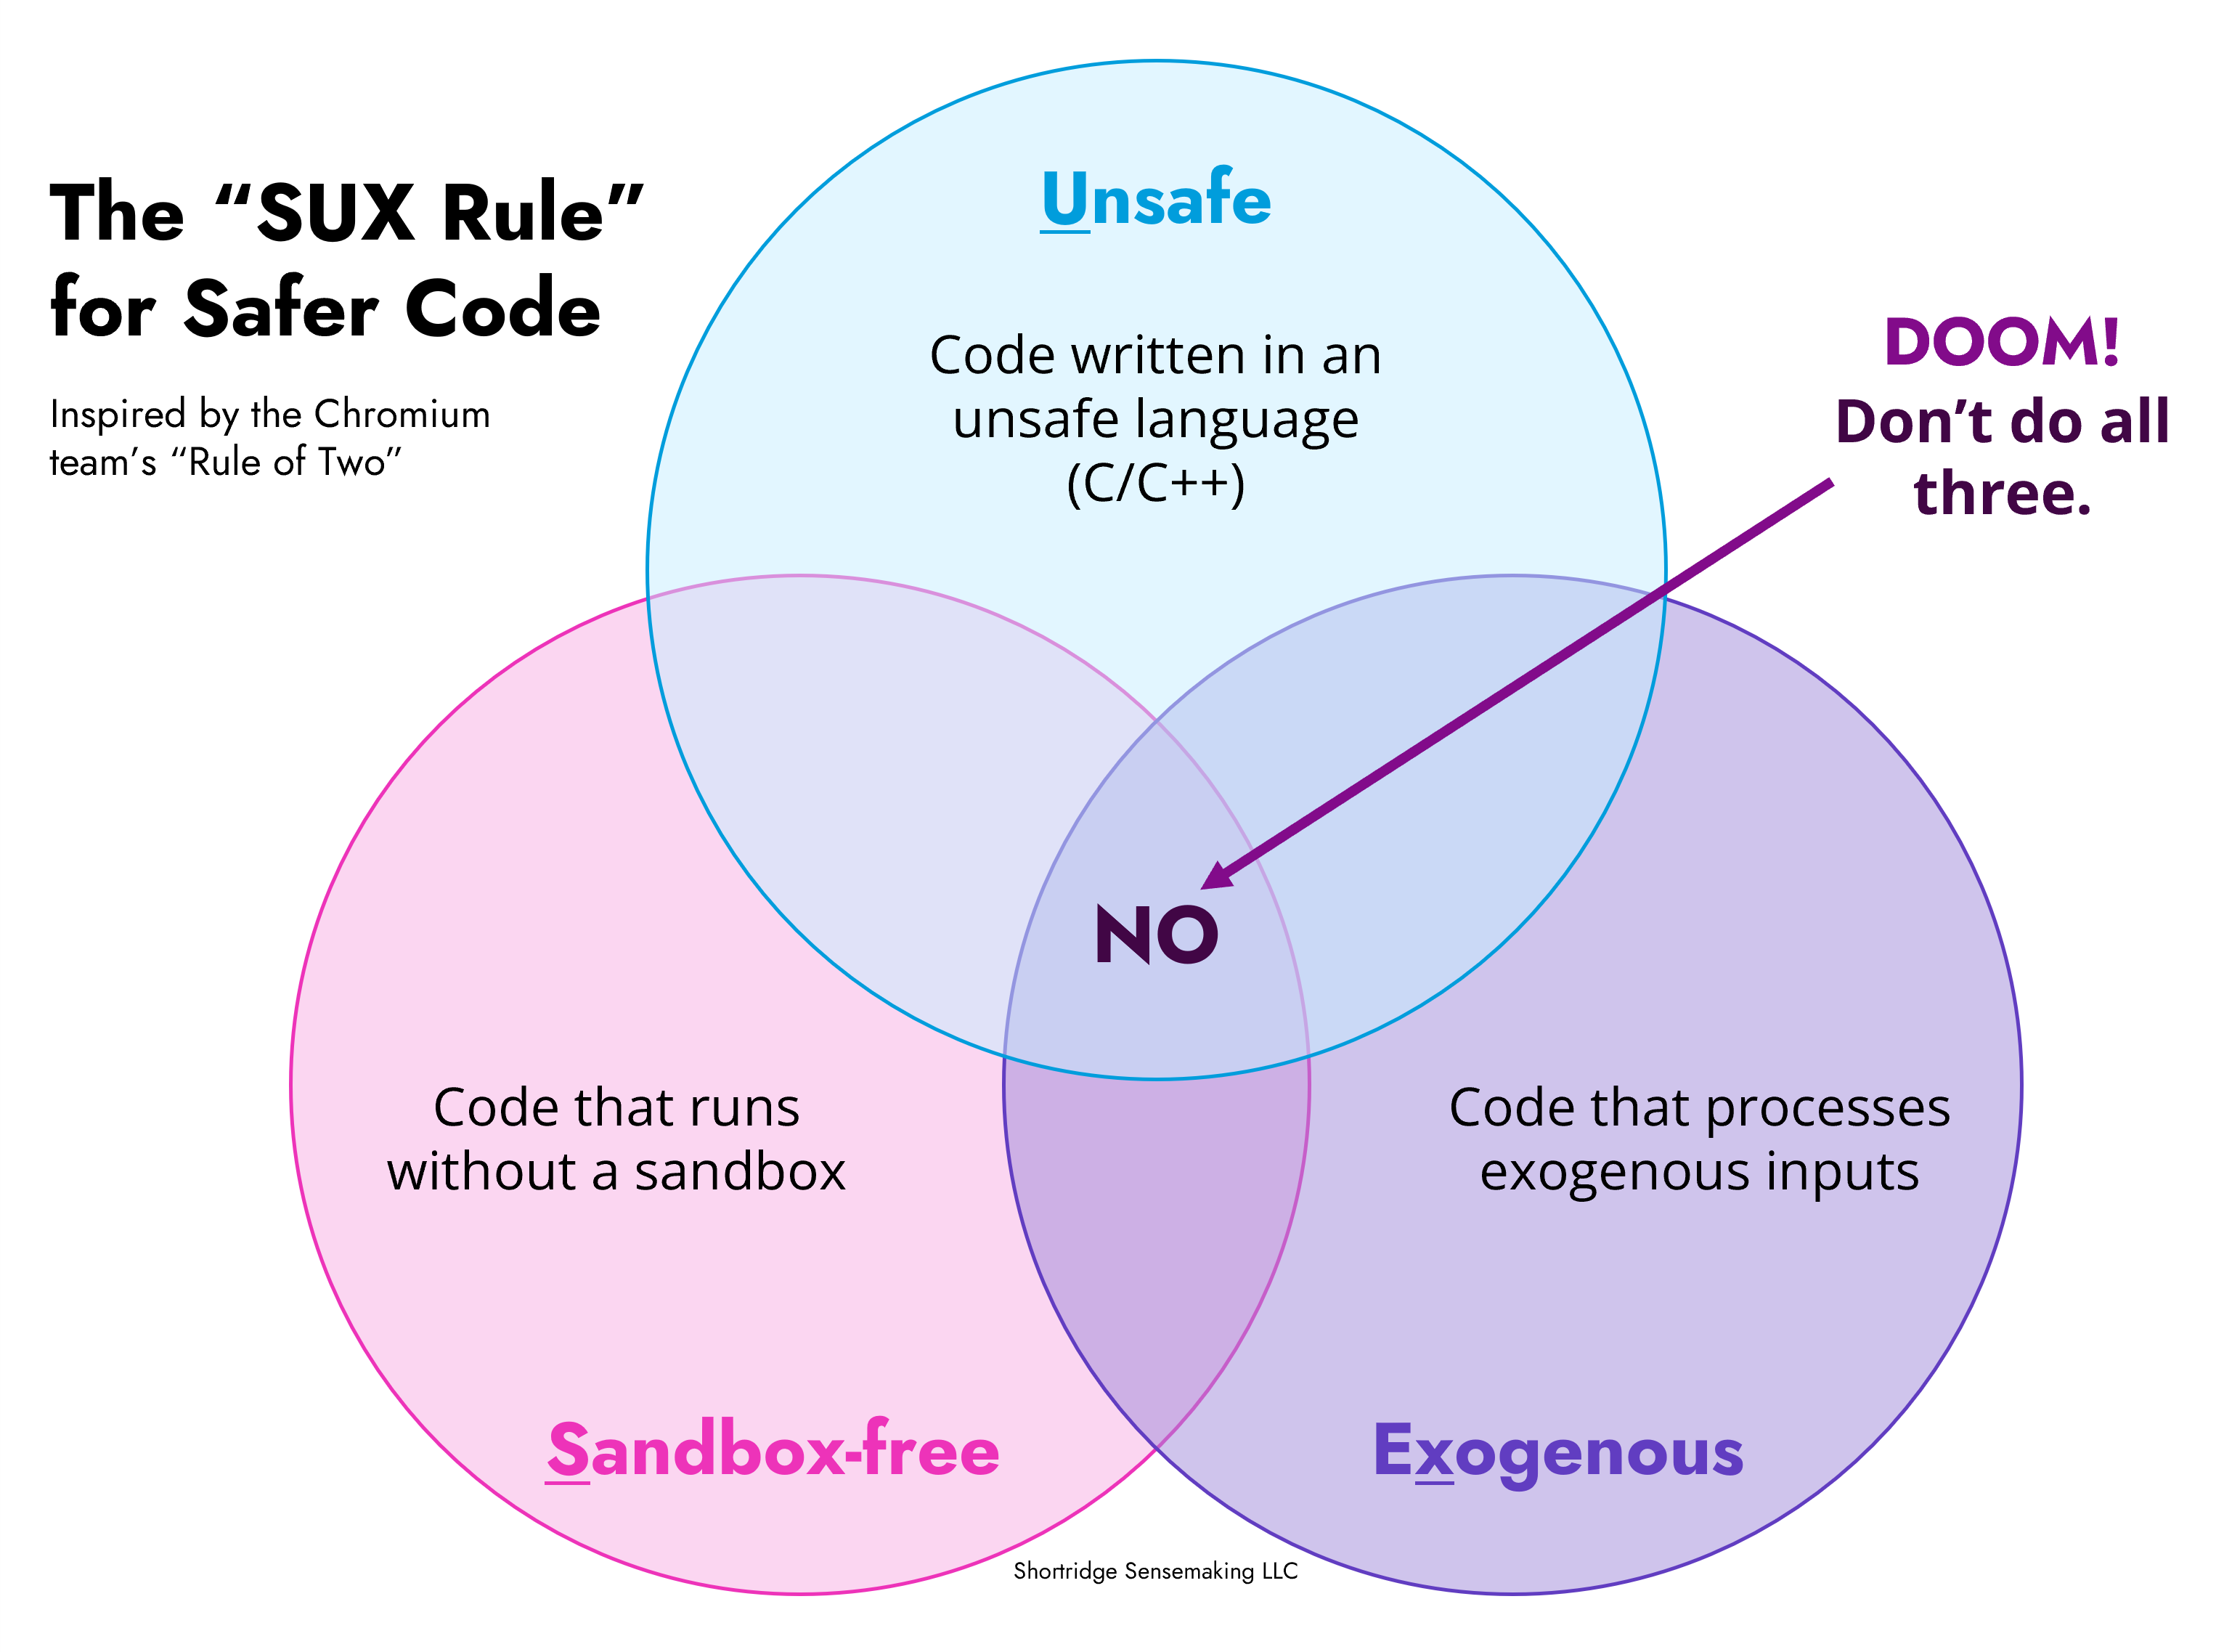 the SUX Rule: Sandbox-free – Unsafe – eXogenous. If our code...